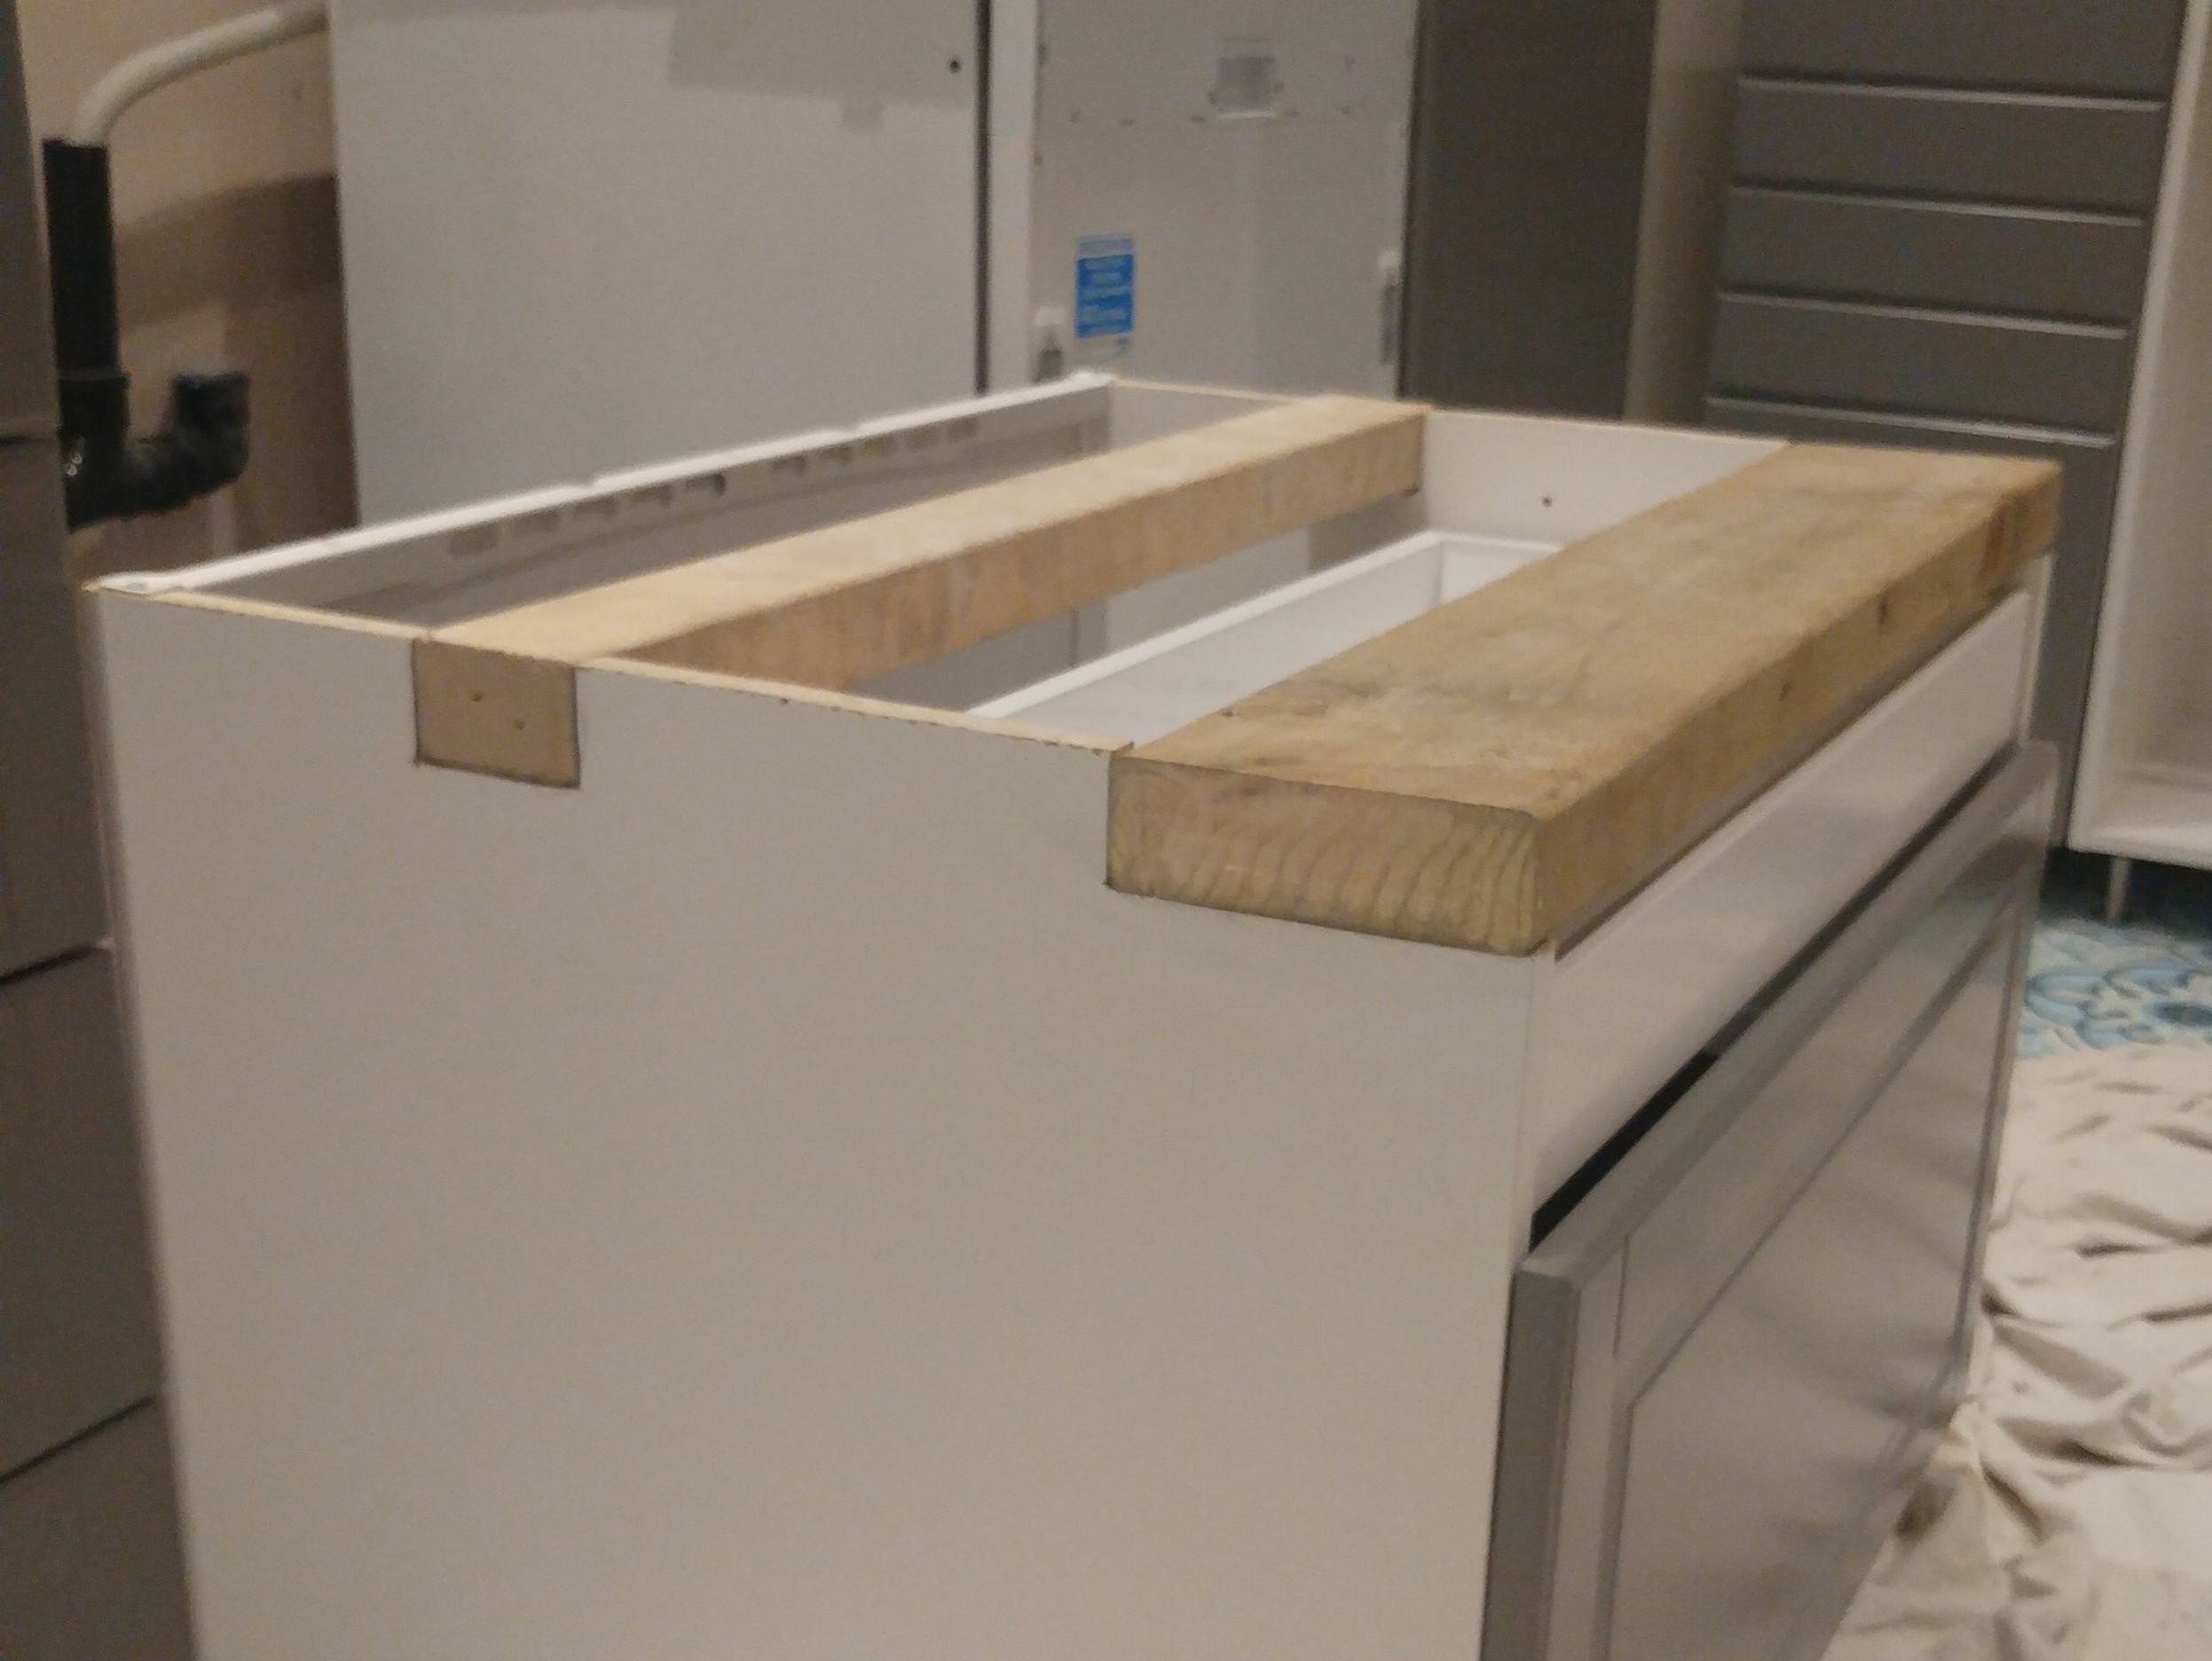 How To Fit A Belfast Sink On An Ikea Kitchen Cabinet Alice